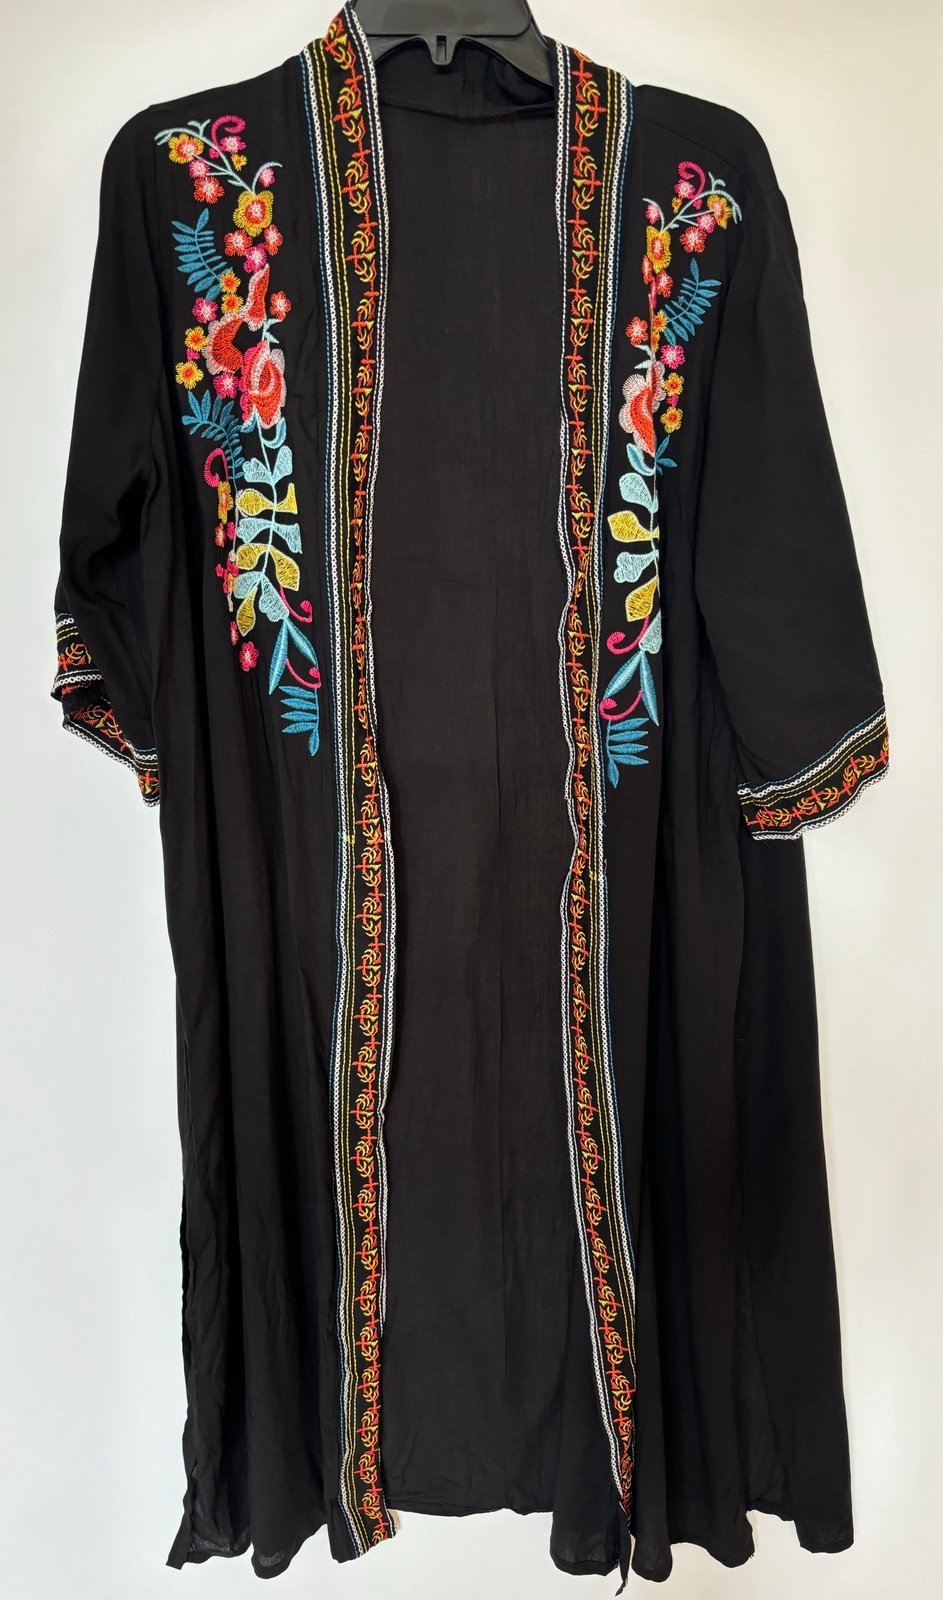 Personality Black Kimono Floral Embroidered Beach Cover Up One Size FlcD8xLUf Novel 